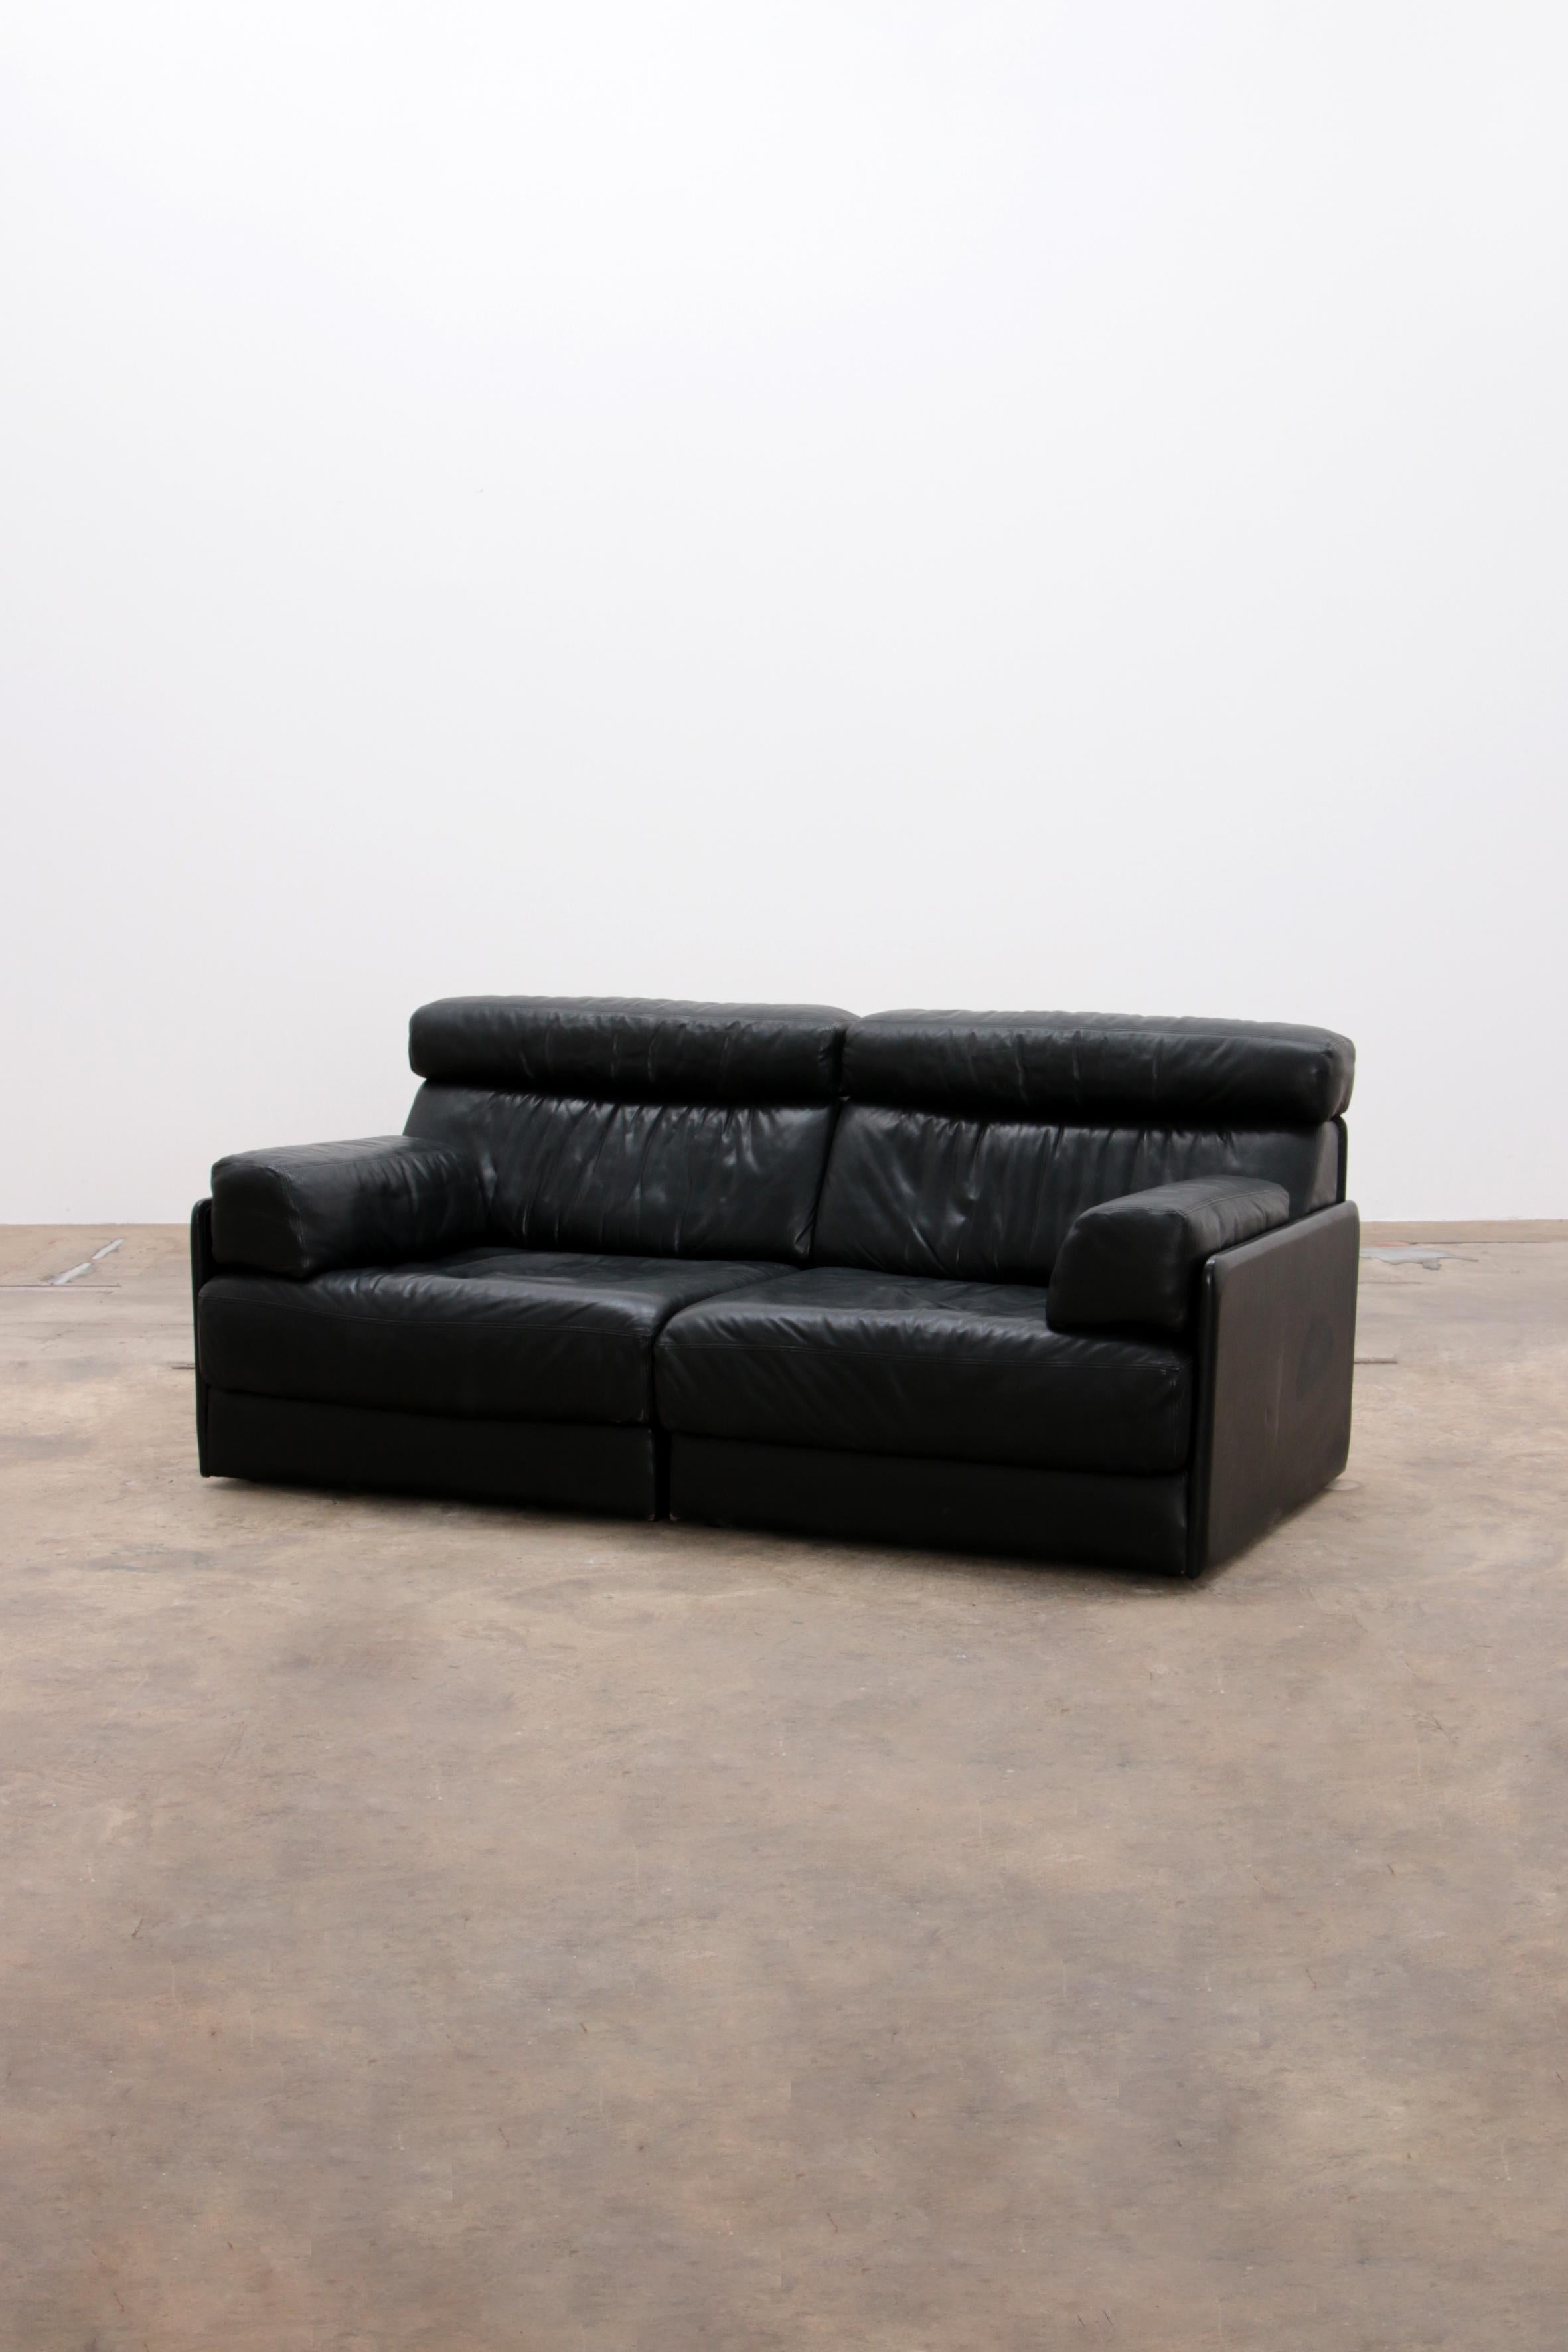 De Sede DS76 Two-Seat Sofa Bed in Black Upholstery by De Sede Design Team
Beautiful black leather sofa with the option of easily turning it into a bed.

DS-76 was launched way back in 1972, when it was considered revolutionary. 
No sofa bed could do